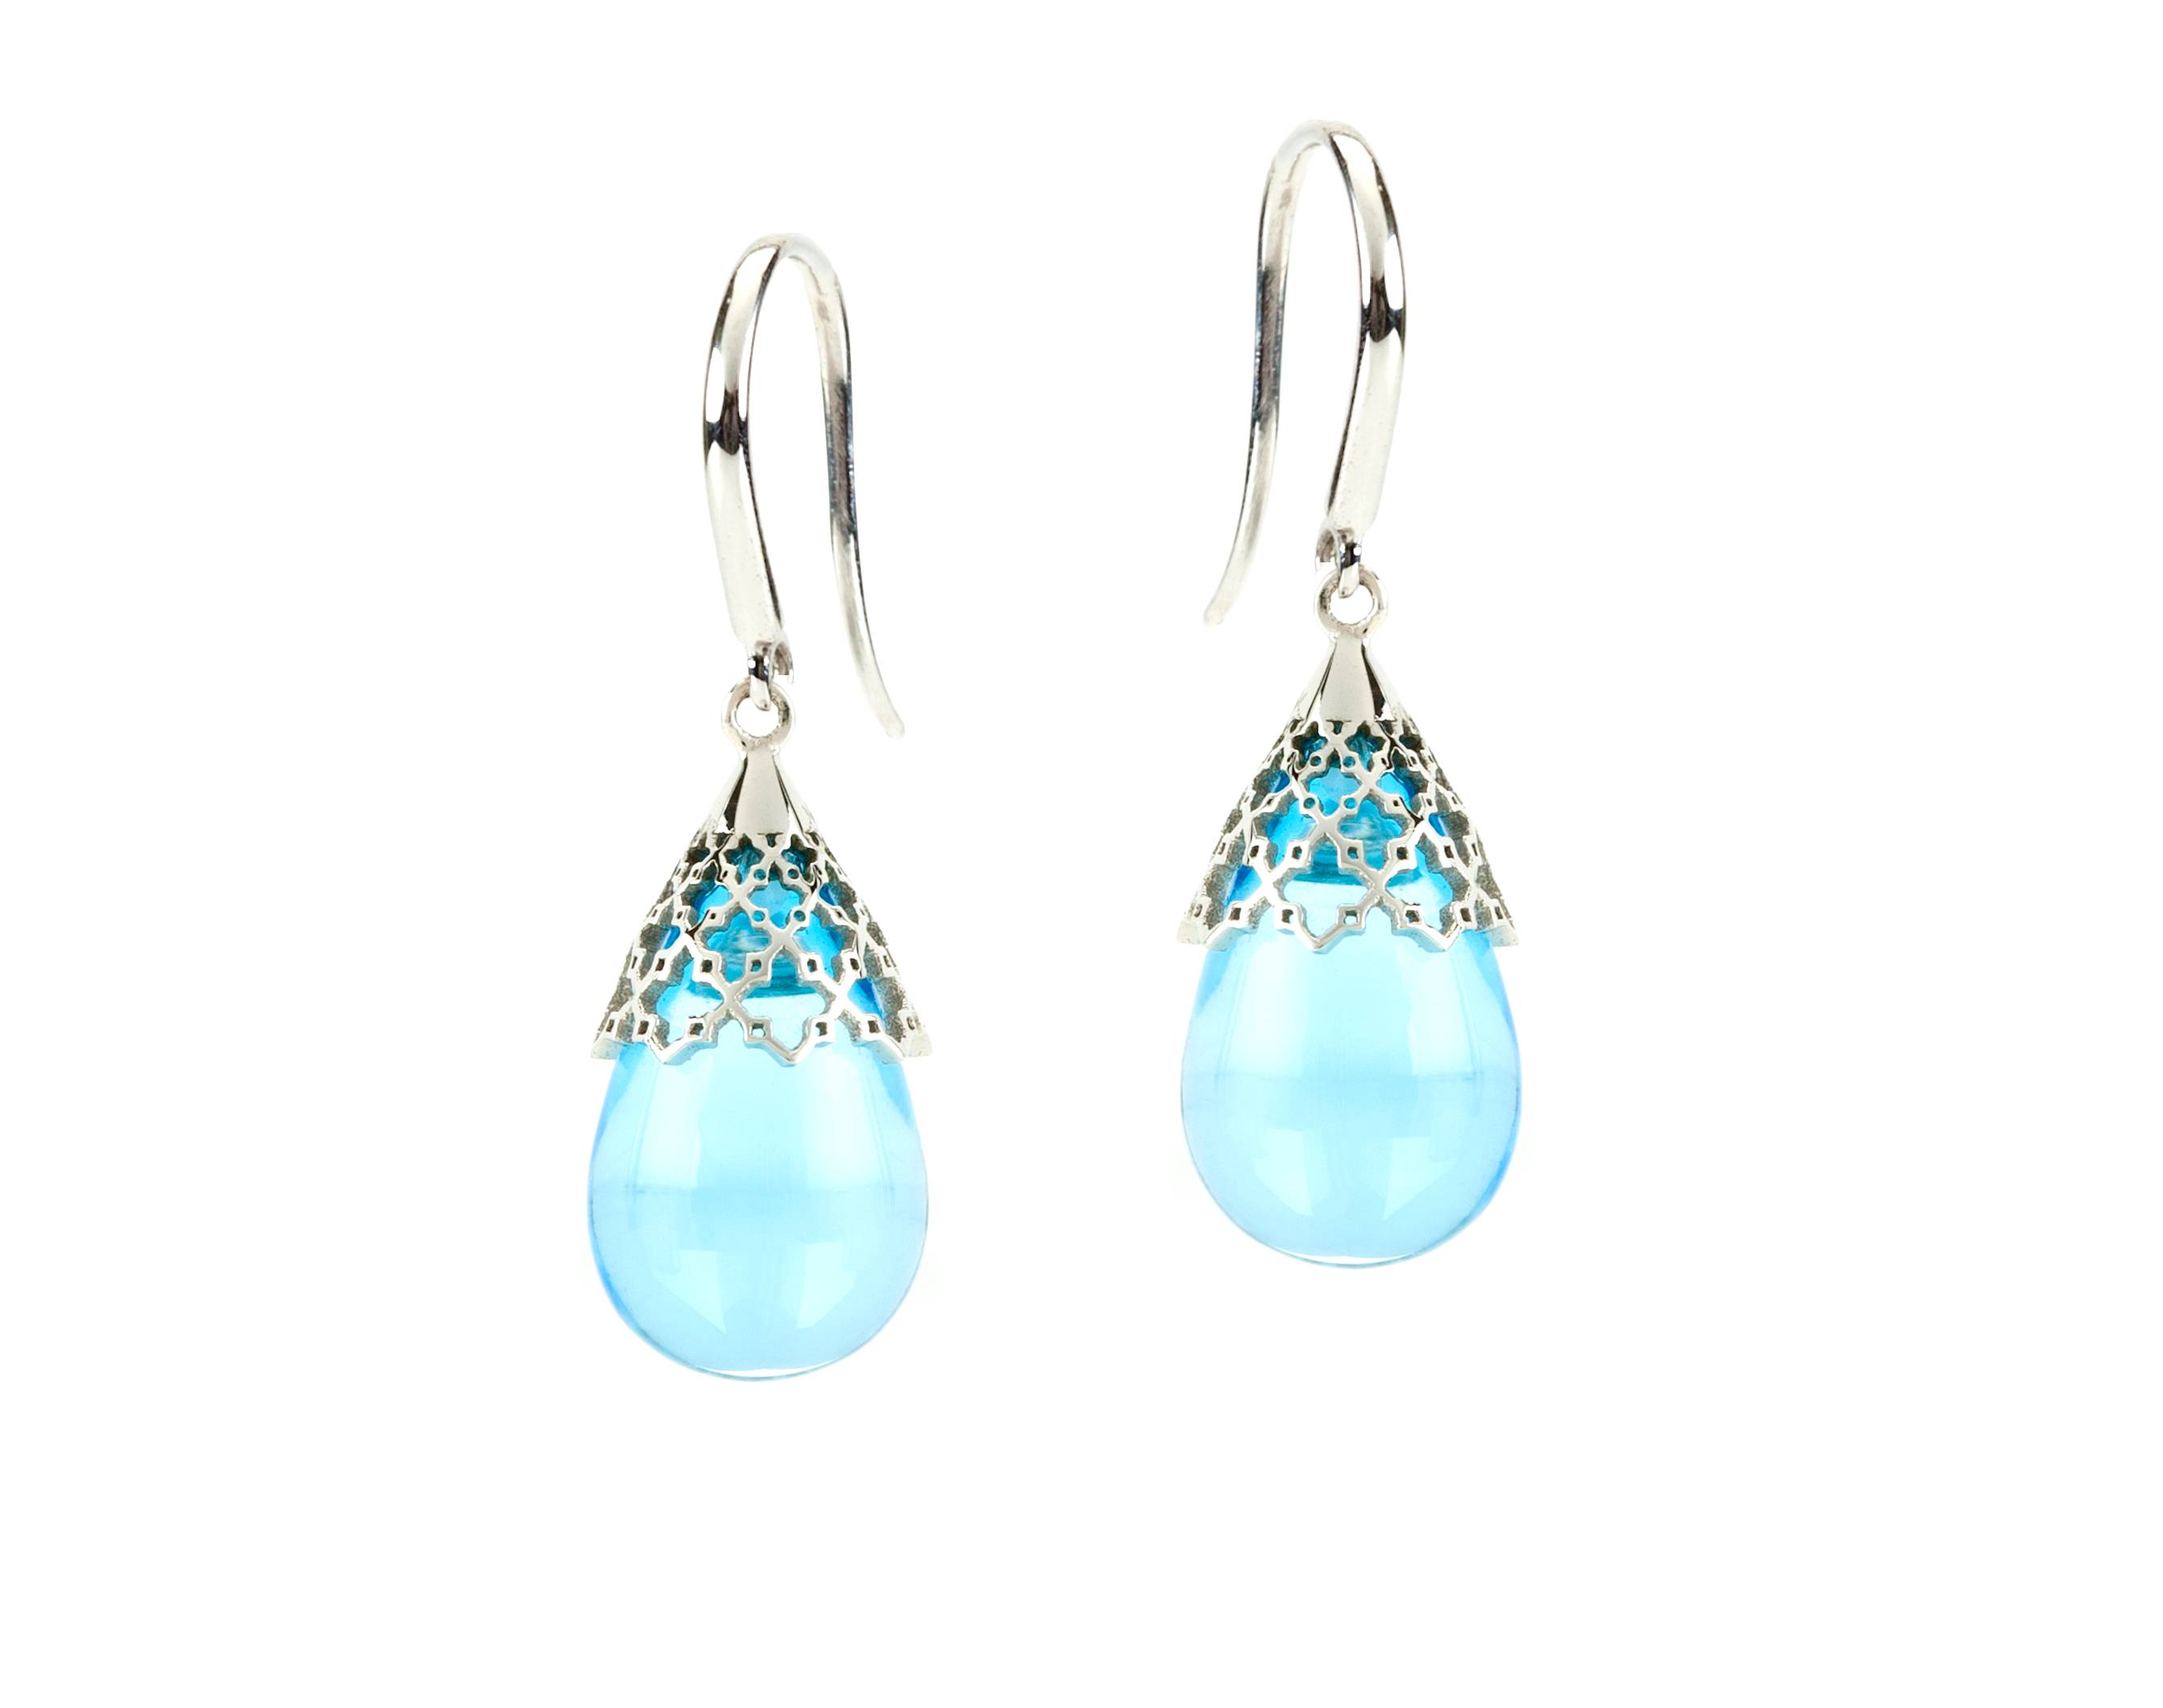 BIRKS MUSE Collection, Mesh Tear Drop Blue Topaz Earrings, in 18kt White Gold